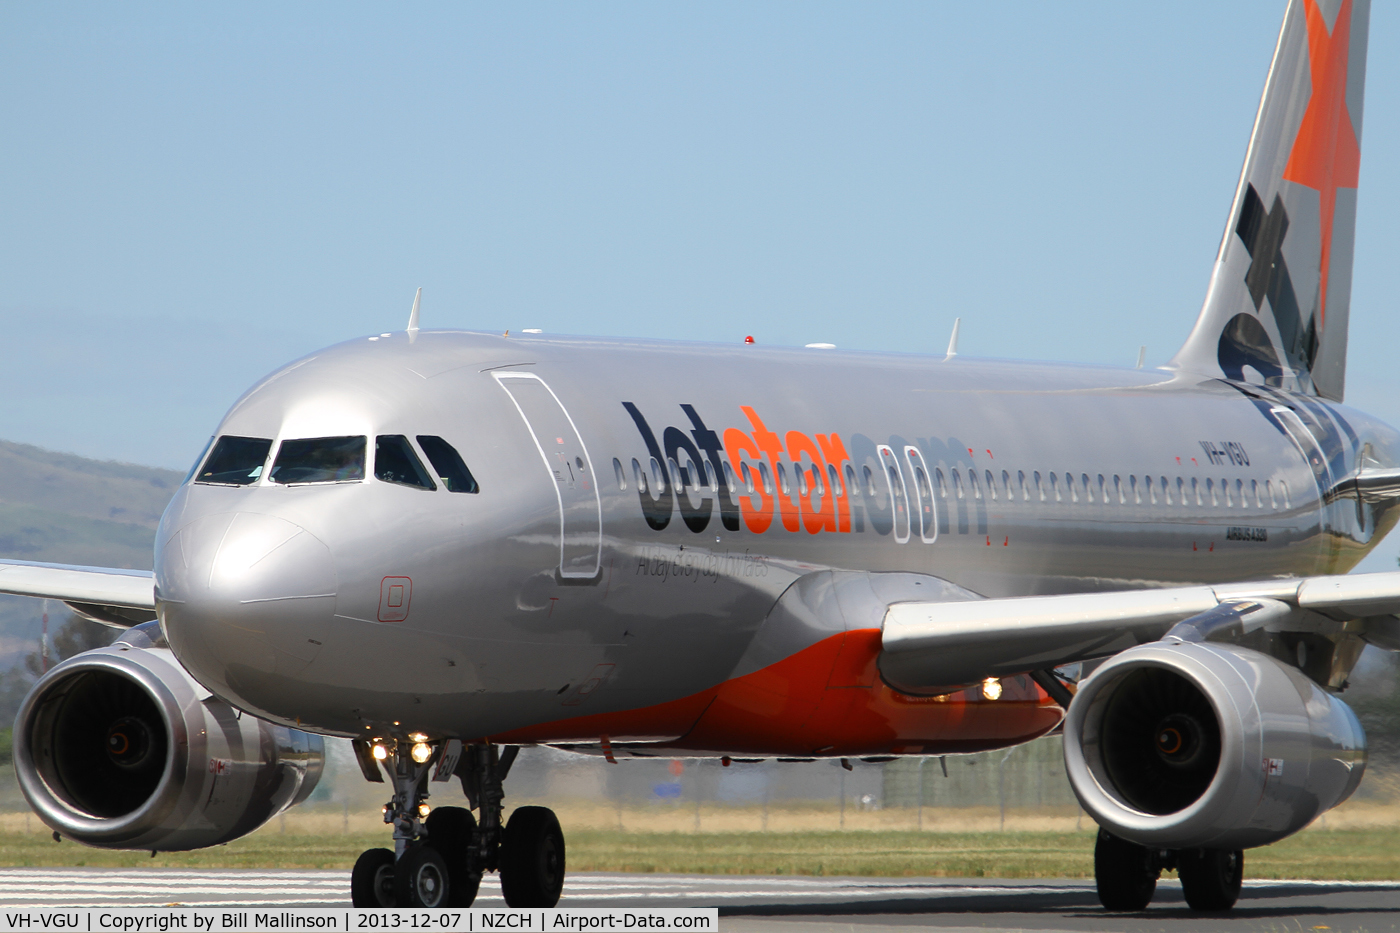 VH-VGU, 2010 Airbus A320-214 C/N 4245, taxiing from 29